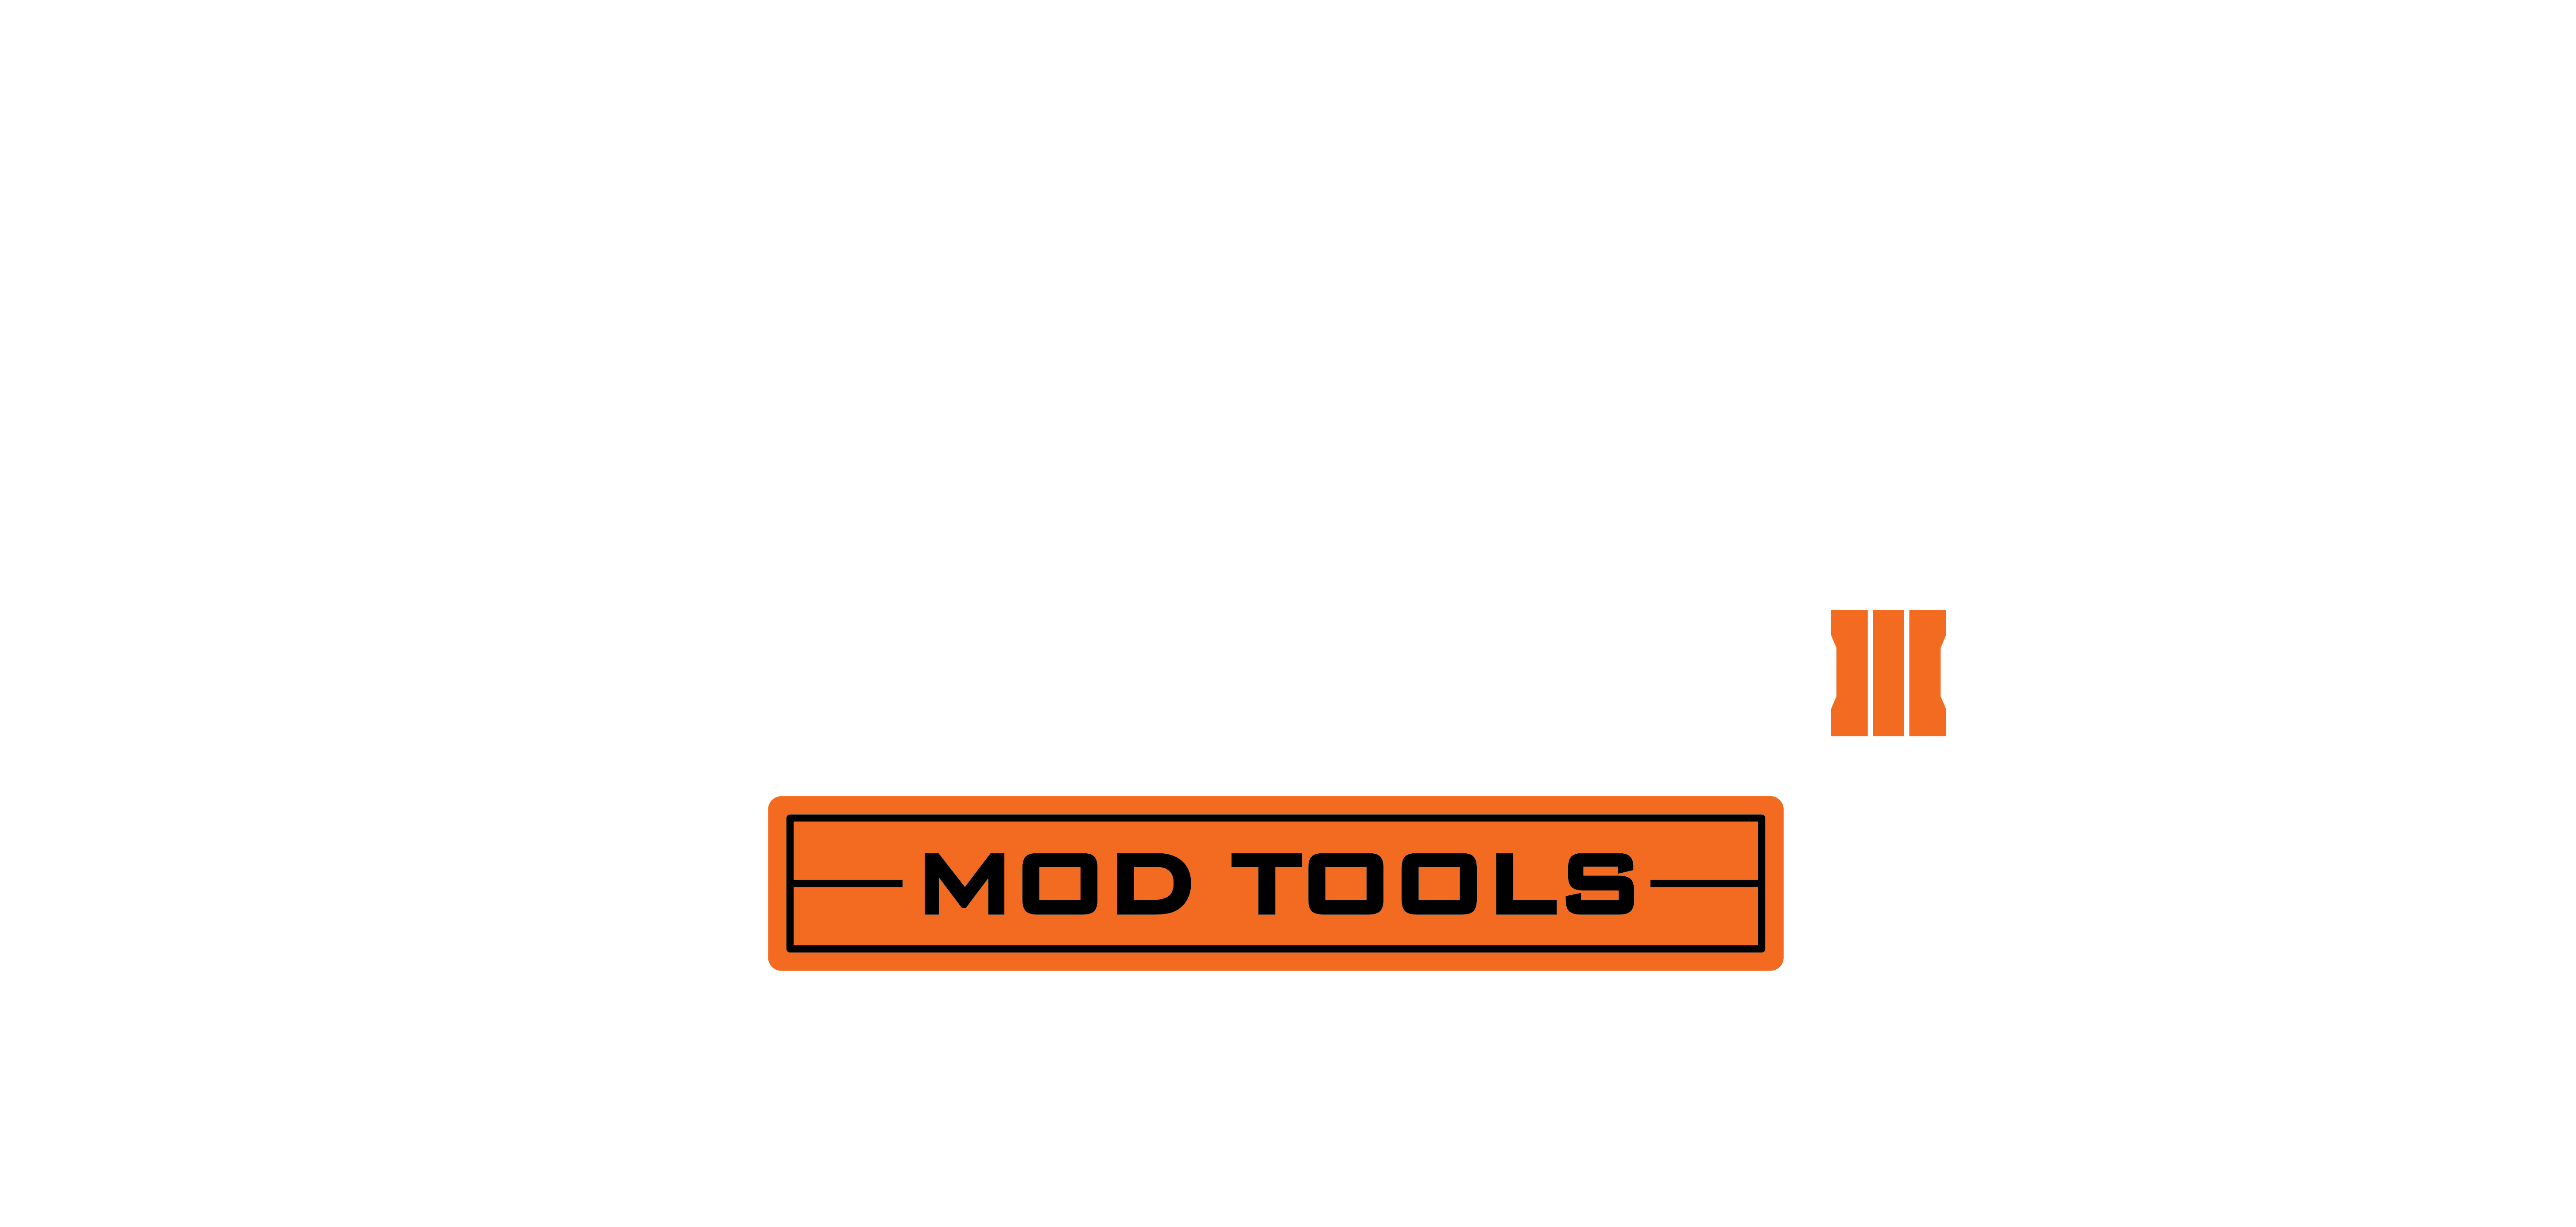 black ops 3 mod tool requirements